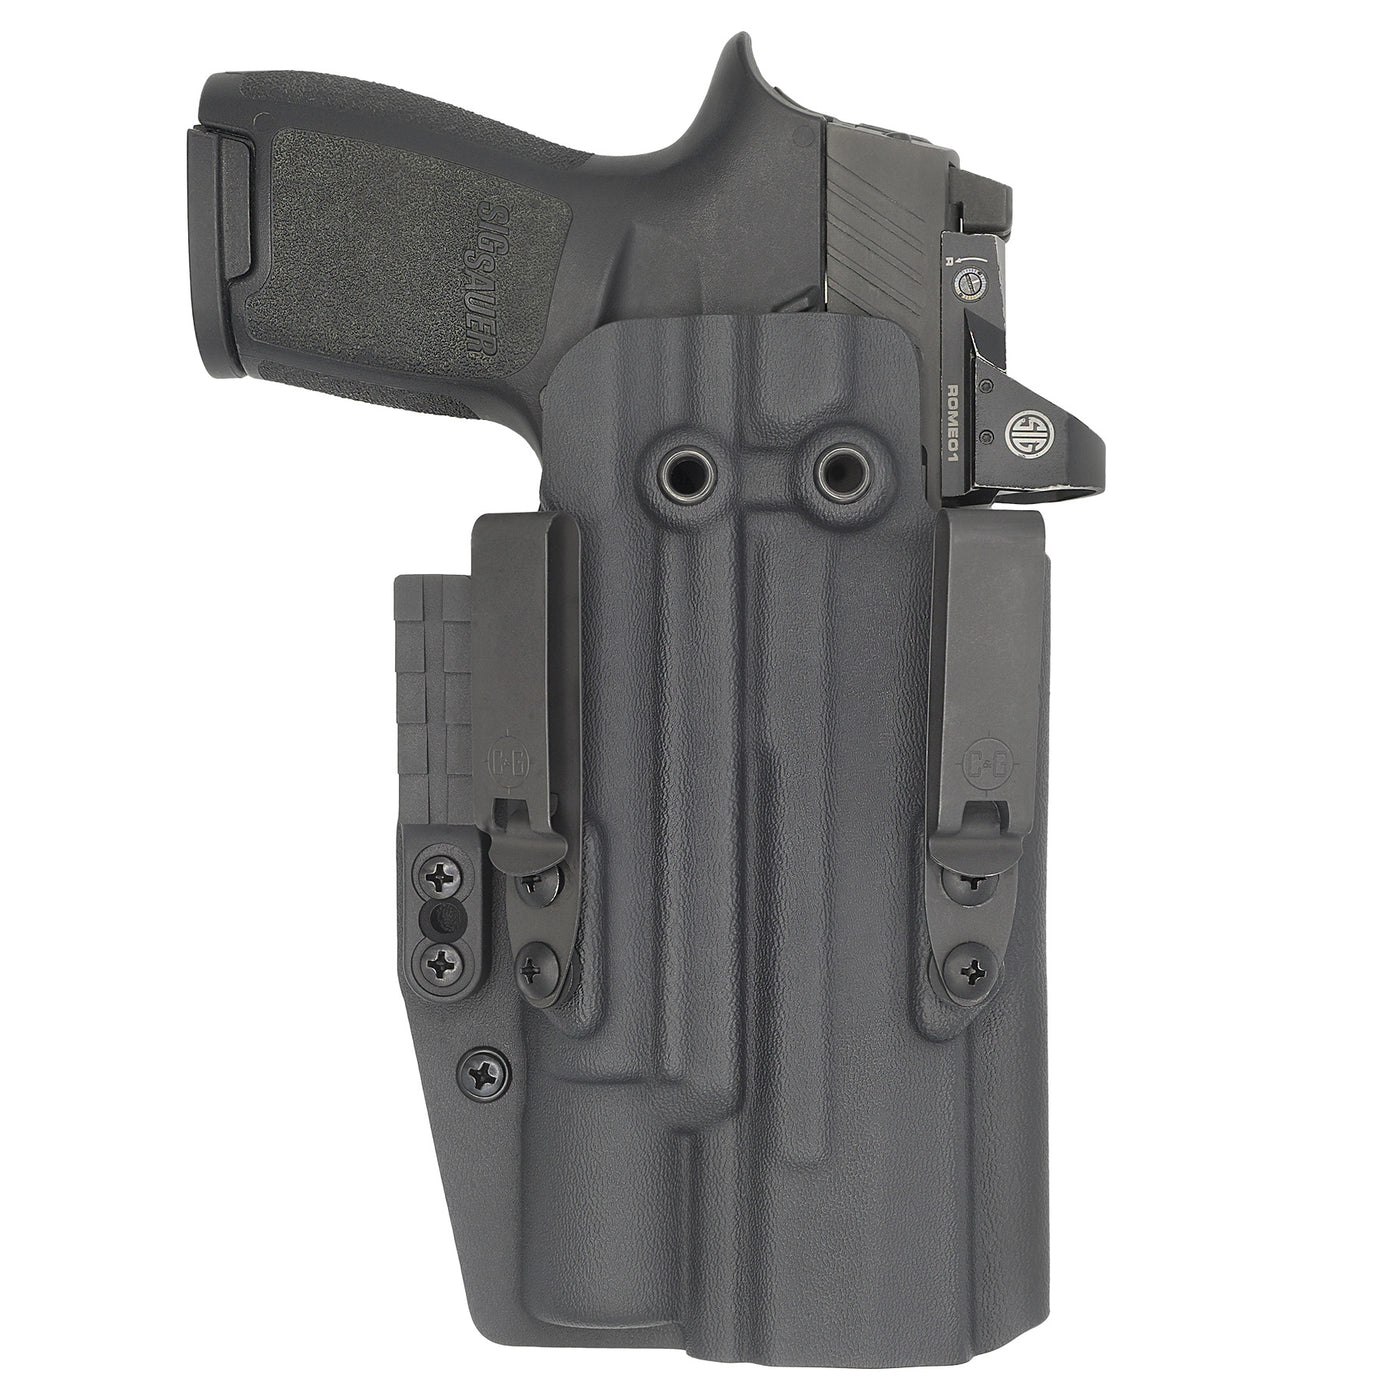 C&G holsters custom IWB ALPHA UPGRADE Tactical FNX45T Surefire X300 in holstered position